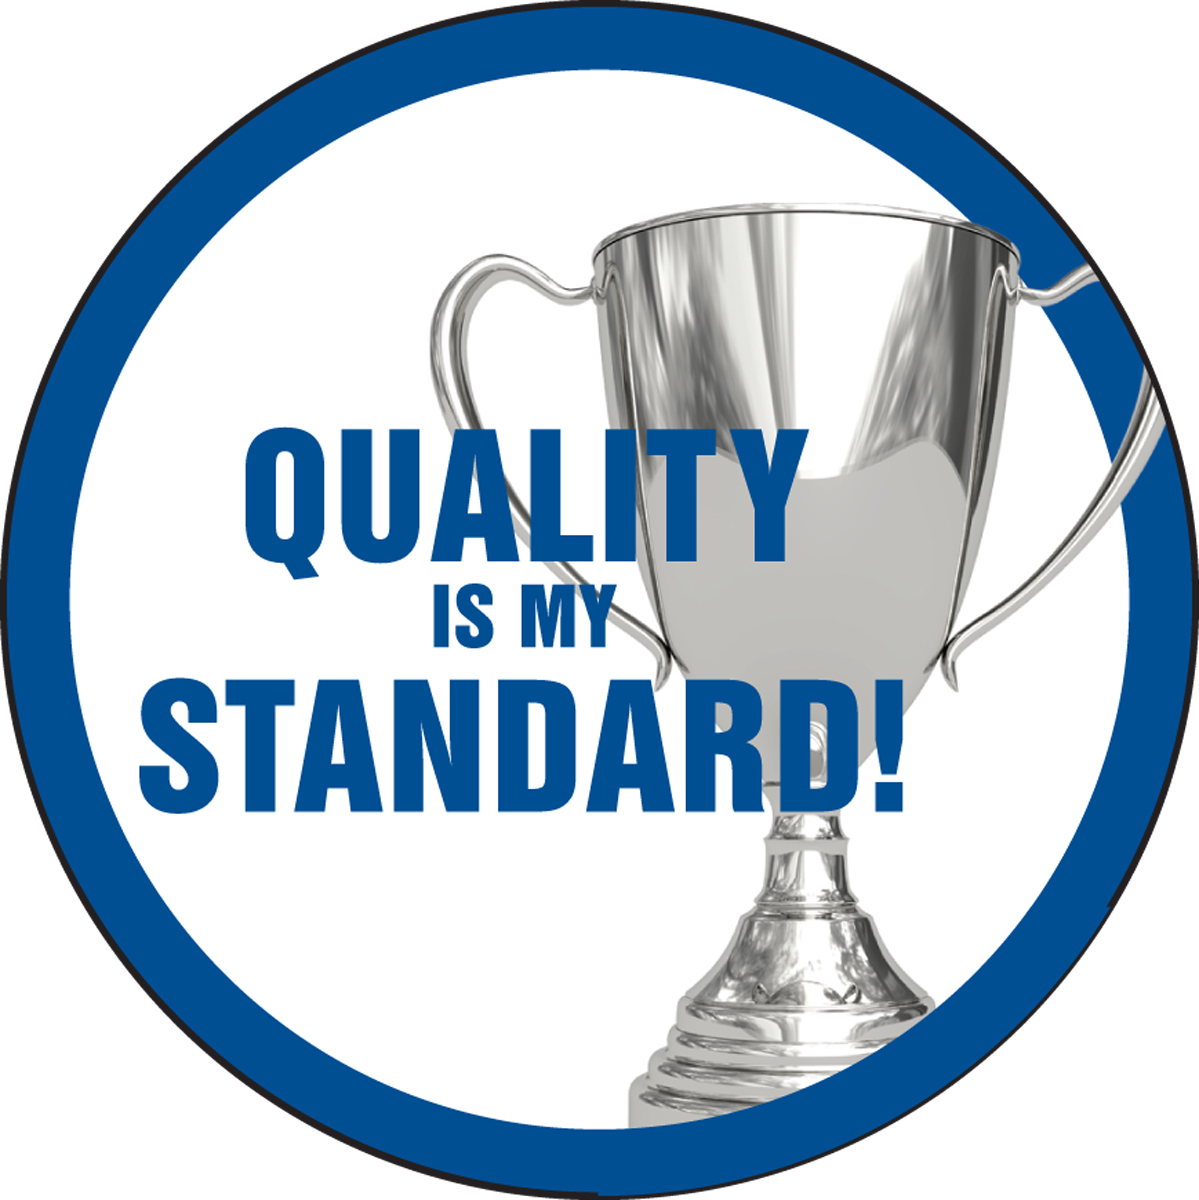 QUALITY IS MY STANDARD